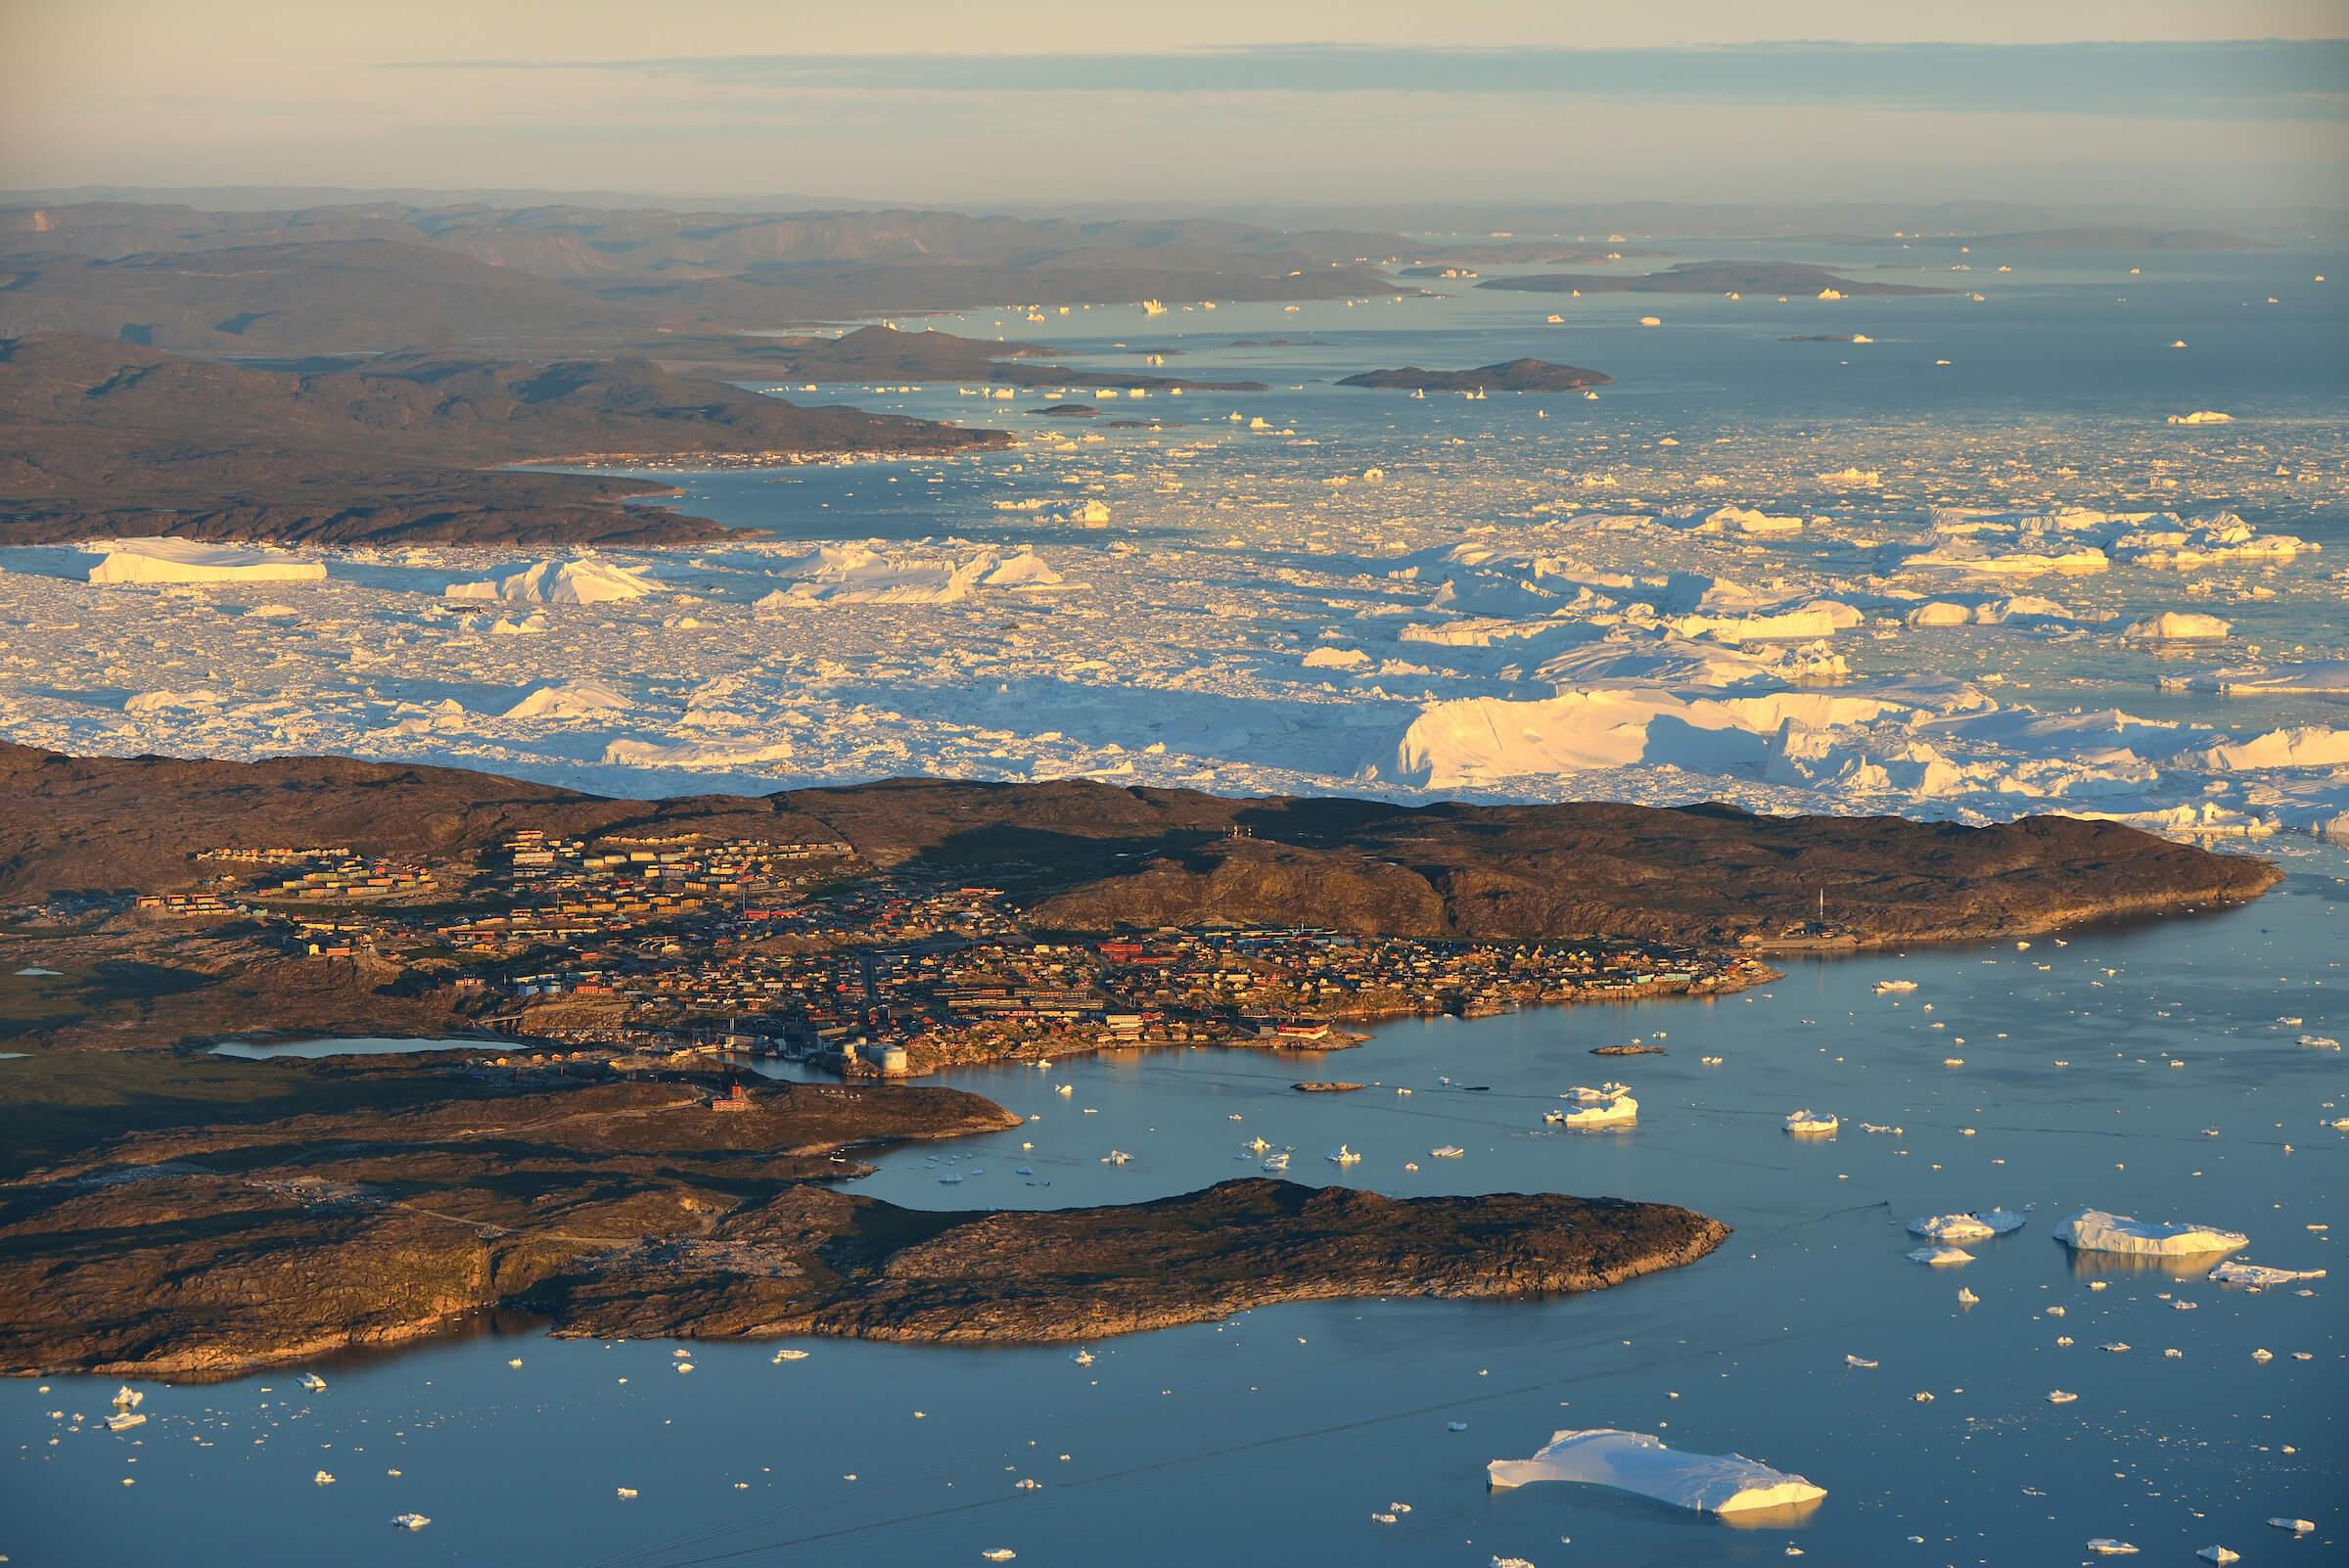 Ilulissat and the Icefjord from the air. By Rino Rasmussen